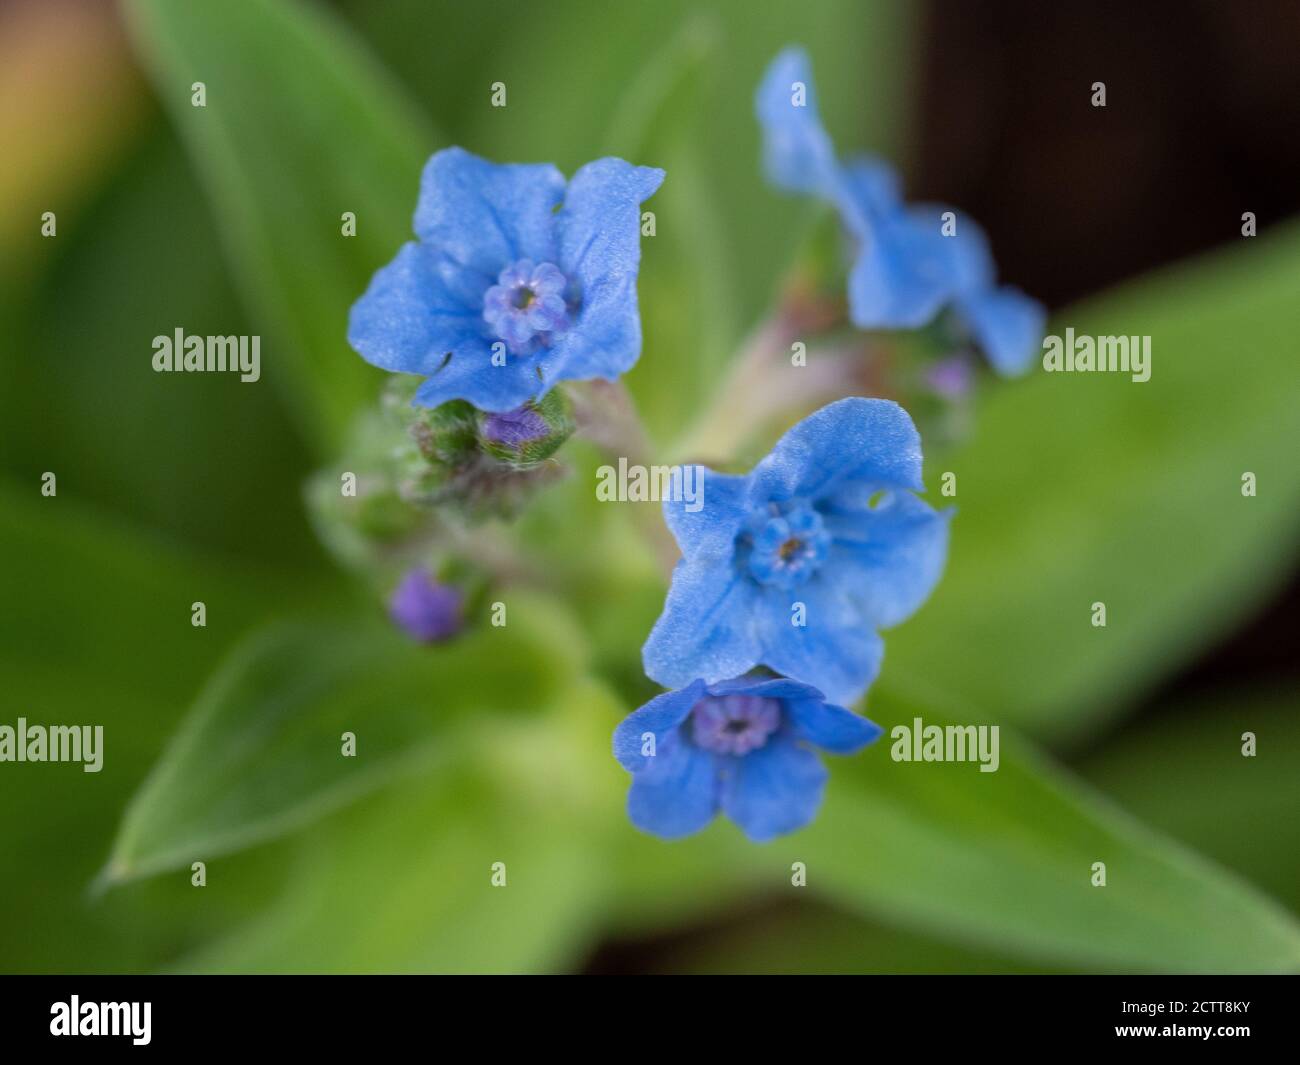 Chinese Forget Me Not Flowers, macro photograph of beautiful tiny baby blue forget-me-nots on blurred green leaves background, Australian garden Stock Photo